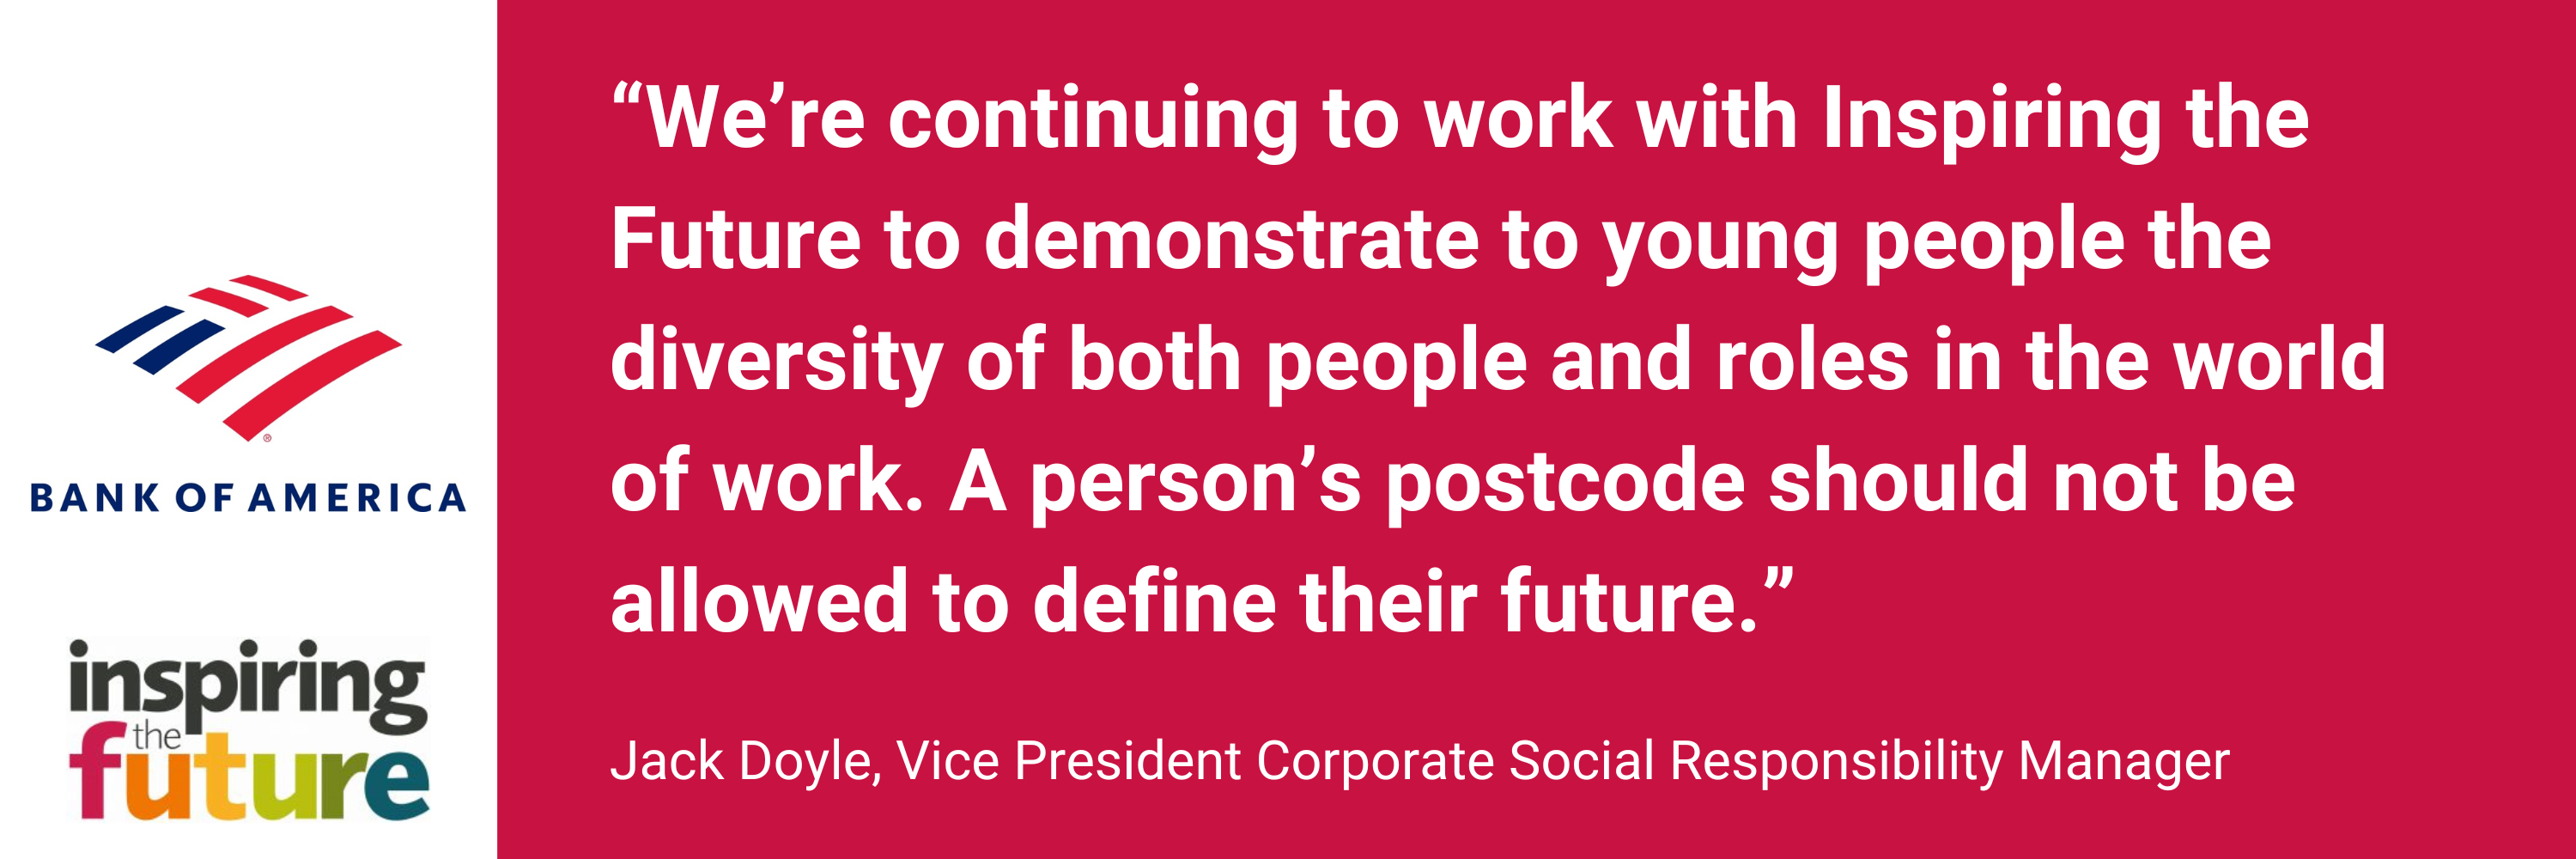 “We’re continuing to work with Inspiring the Future to demonstrate to young people the diversity of both people and roles in the world of work. A person’s postcode should not be allowed to define their future.” Jack Doyle, Vice President Corporate Social Responsibility Manager